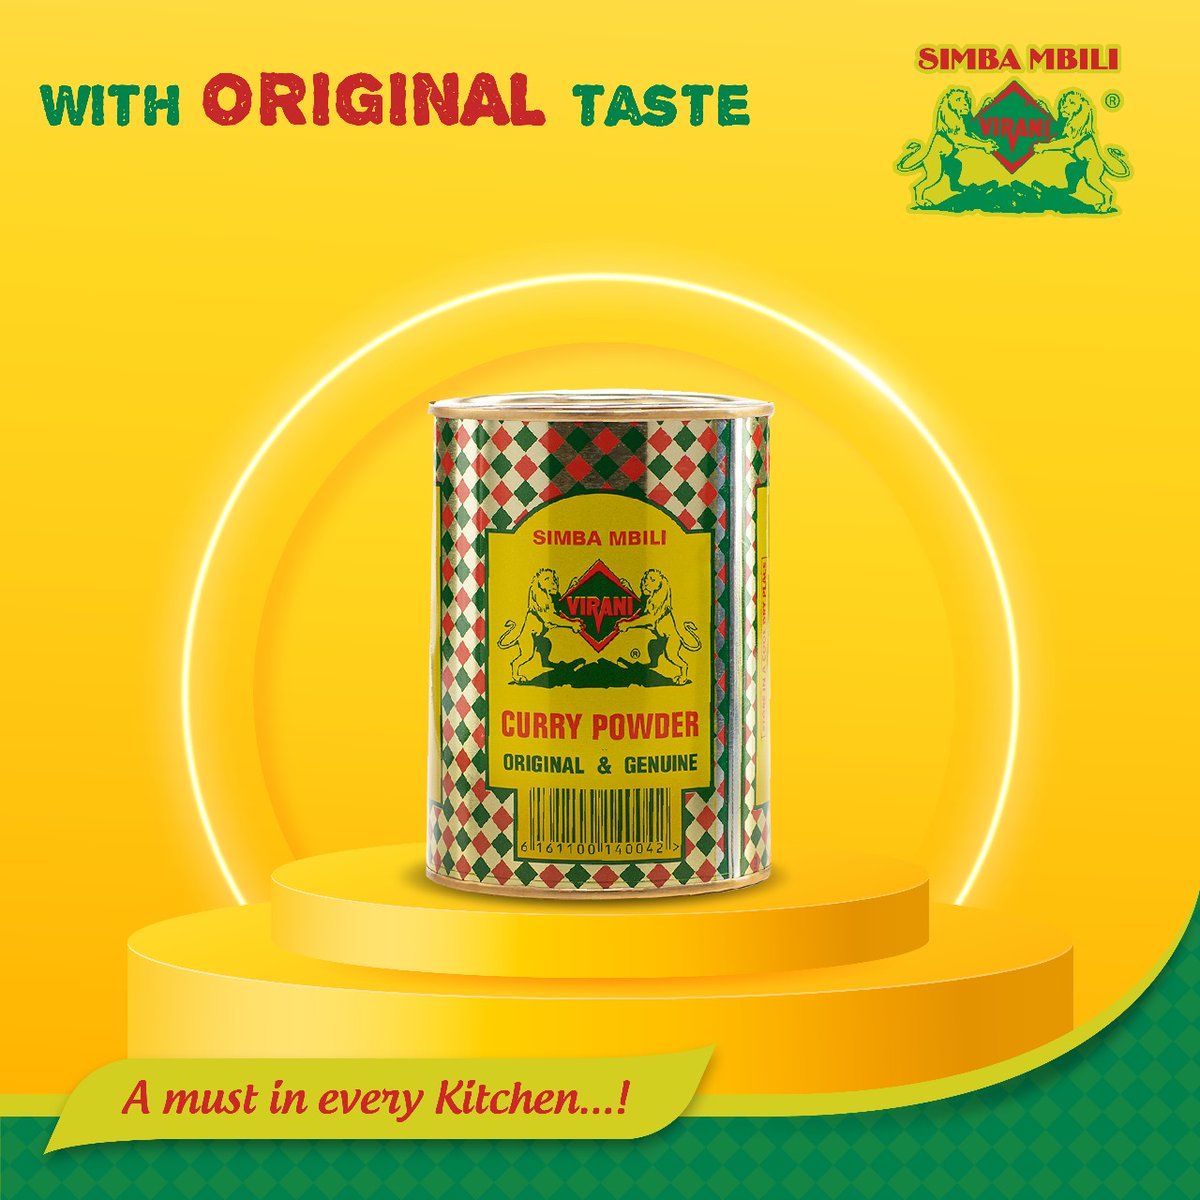 Even packaged, the Simba Mbili Curry Powder maintains the flavours and freshness of a homemade curry powder.
#SimbaMbili #CurryPowder #HomemadeFlavors #AuthenticTaste #TasteOfHome